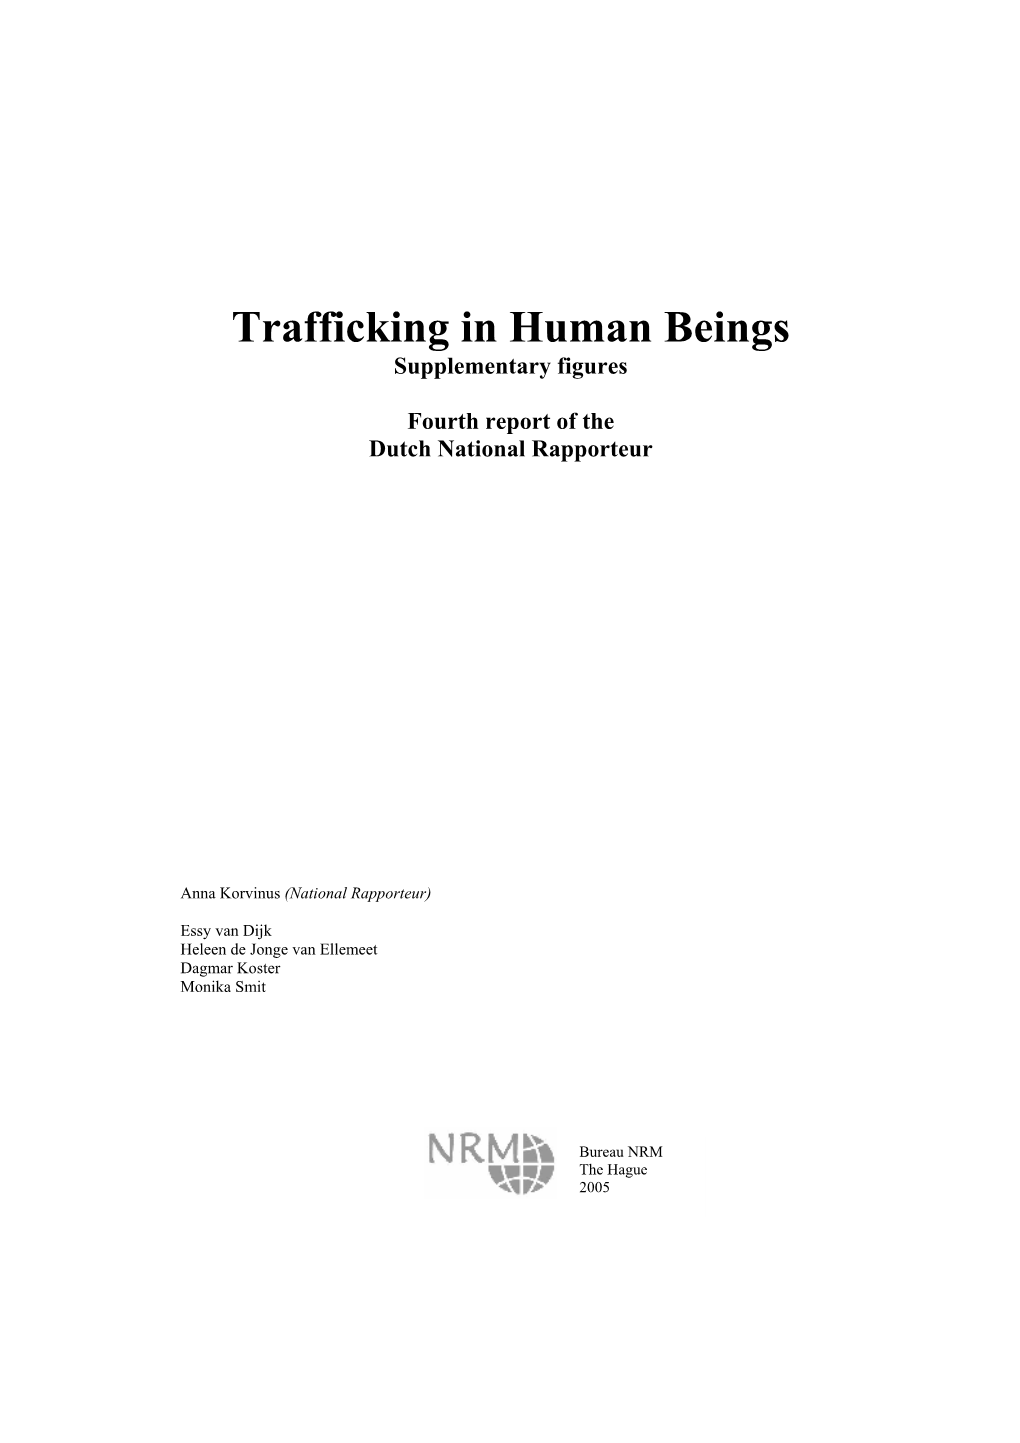 Trafficking in Human Beings Supplementary Figures